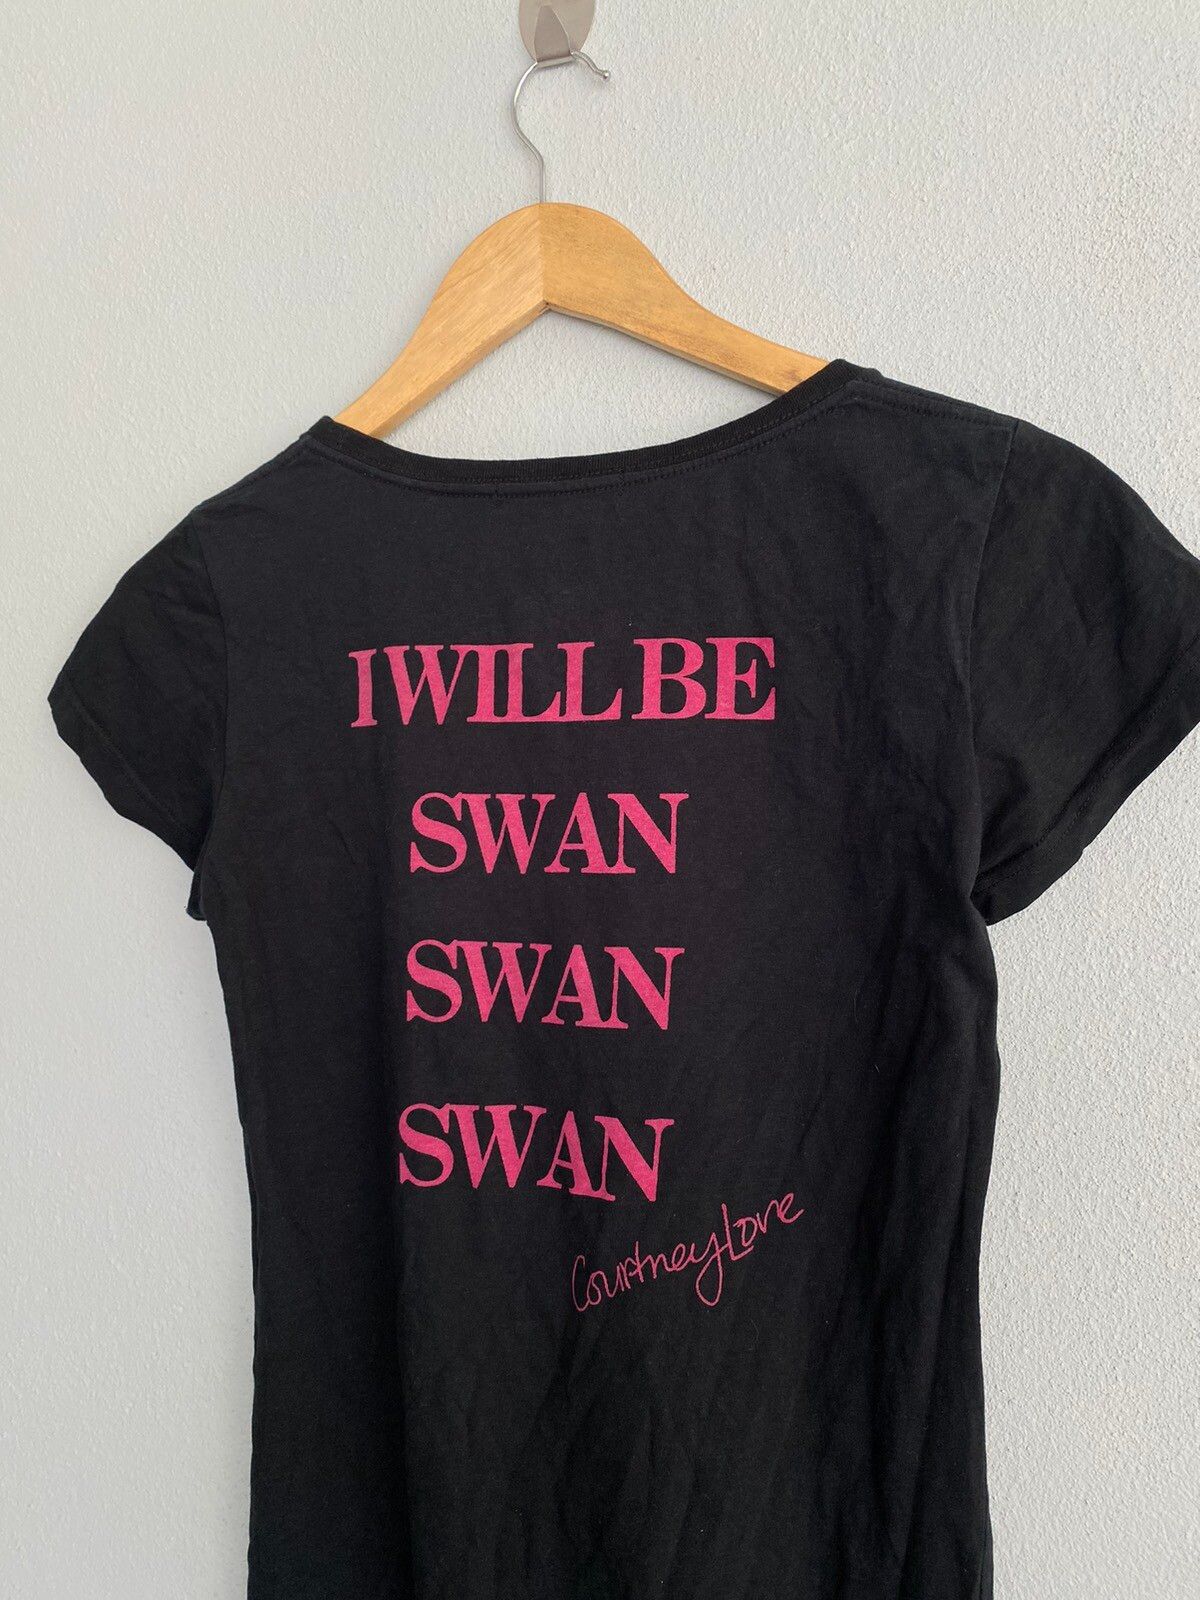 Hysteric Glamour x Courtney Love I Will Be Swan Swan tees - 5